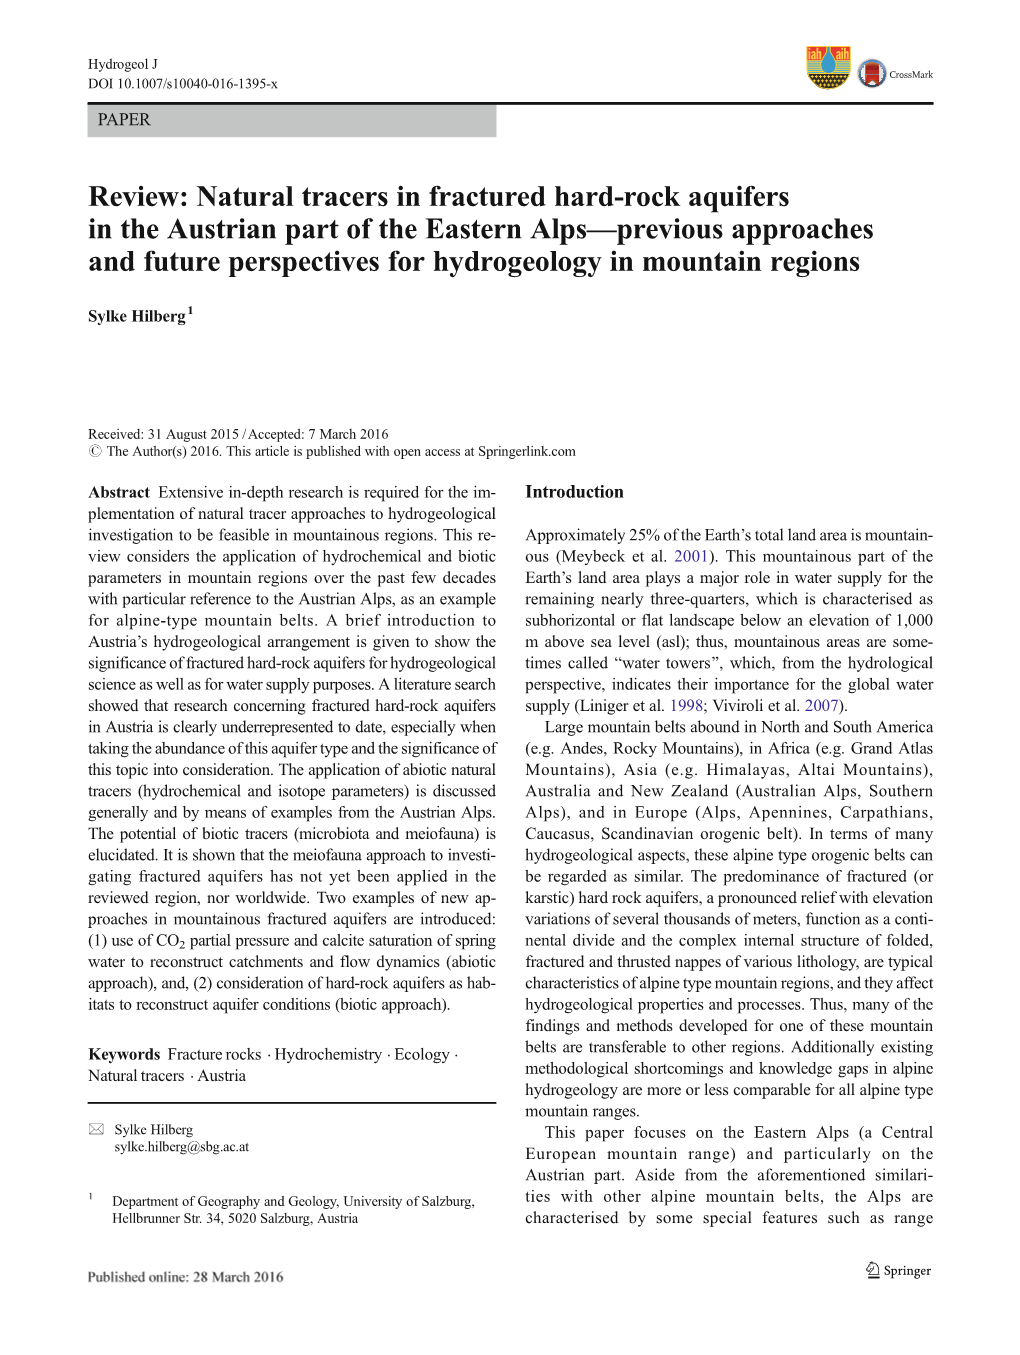 Natural Tracers in Fractured Hard-Rock Aquifers in the Austrian Part of The